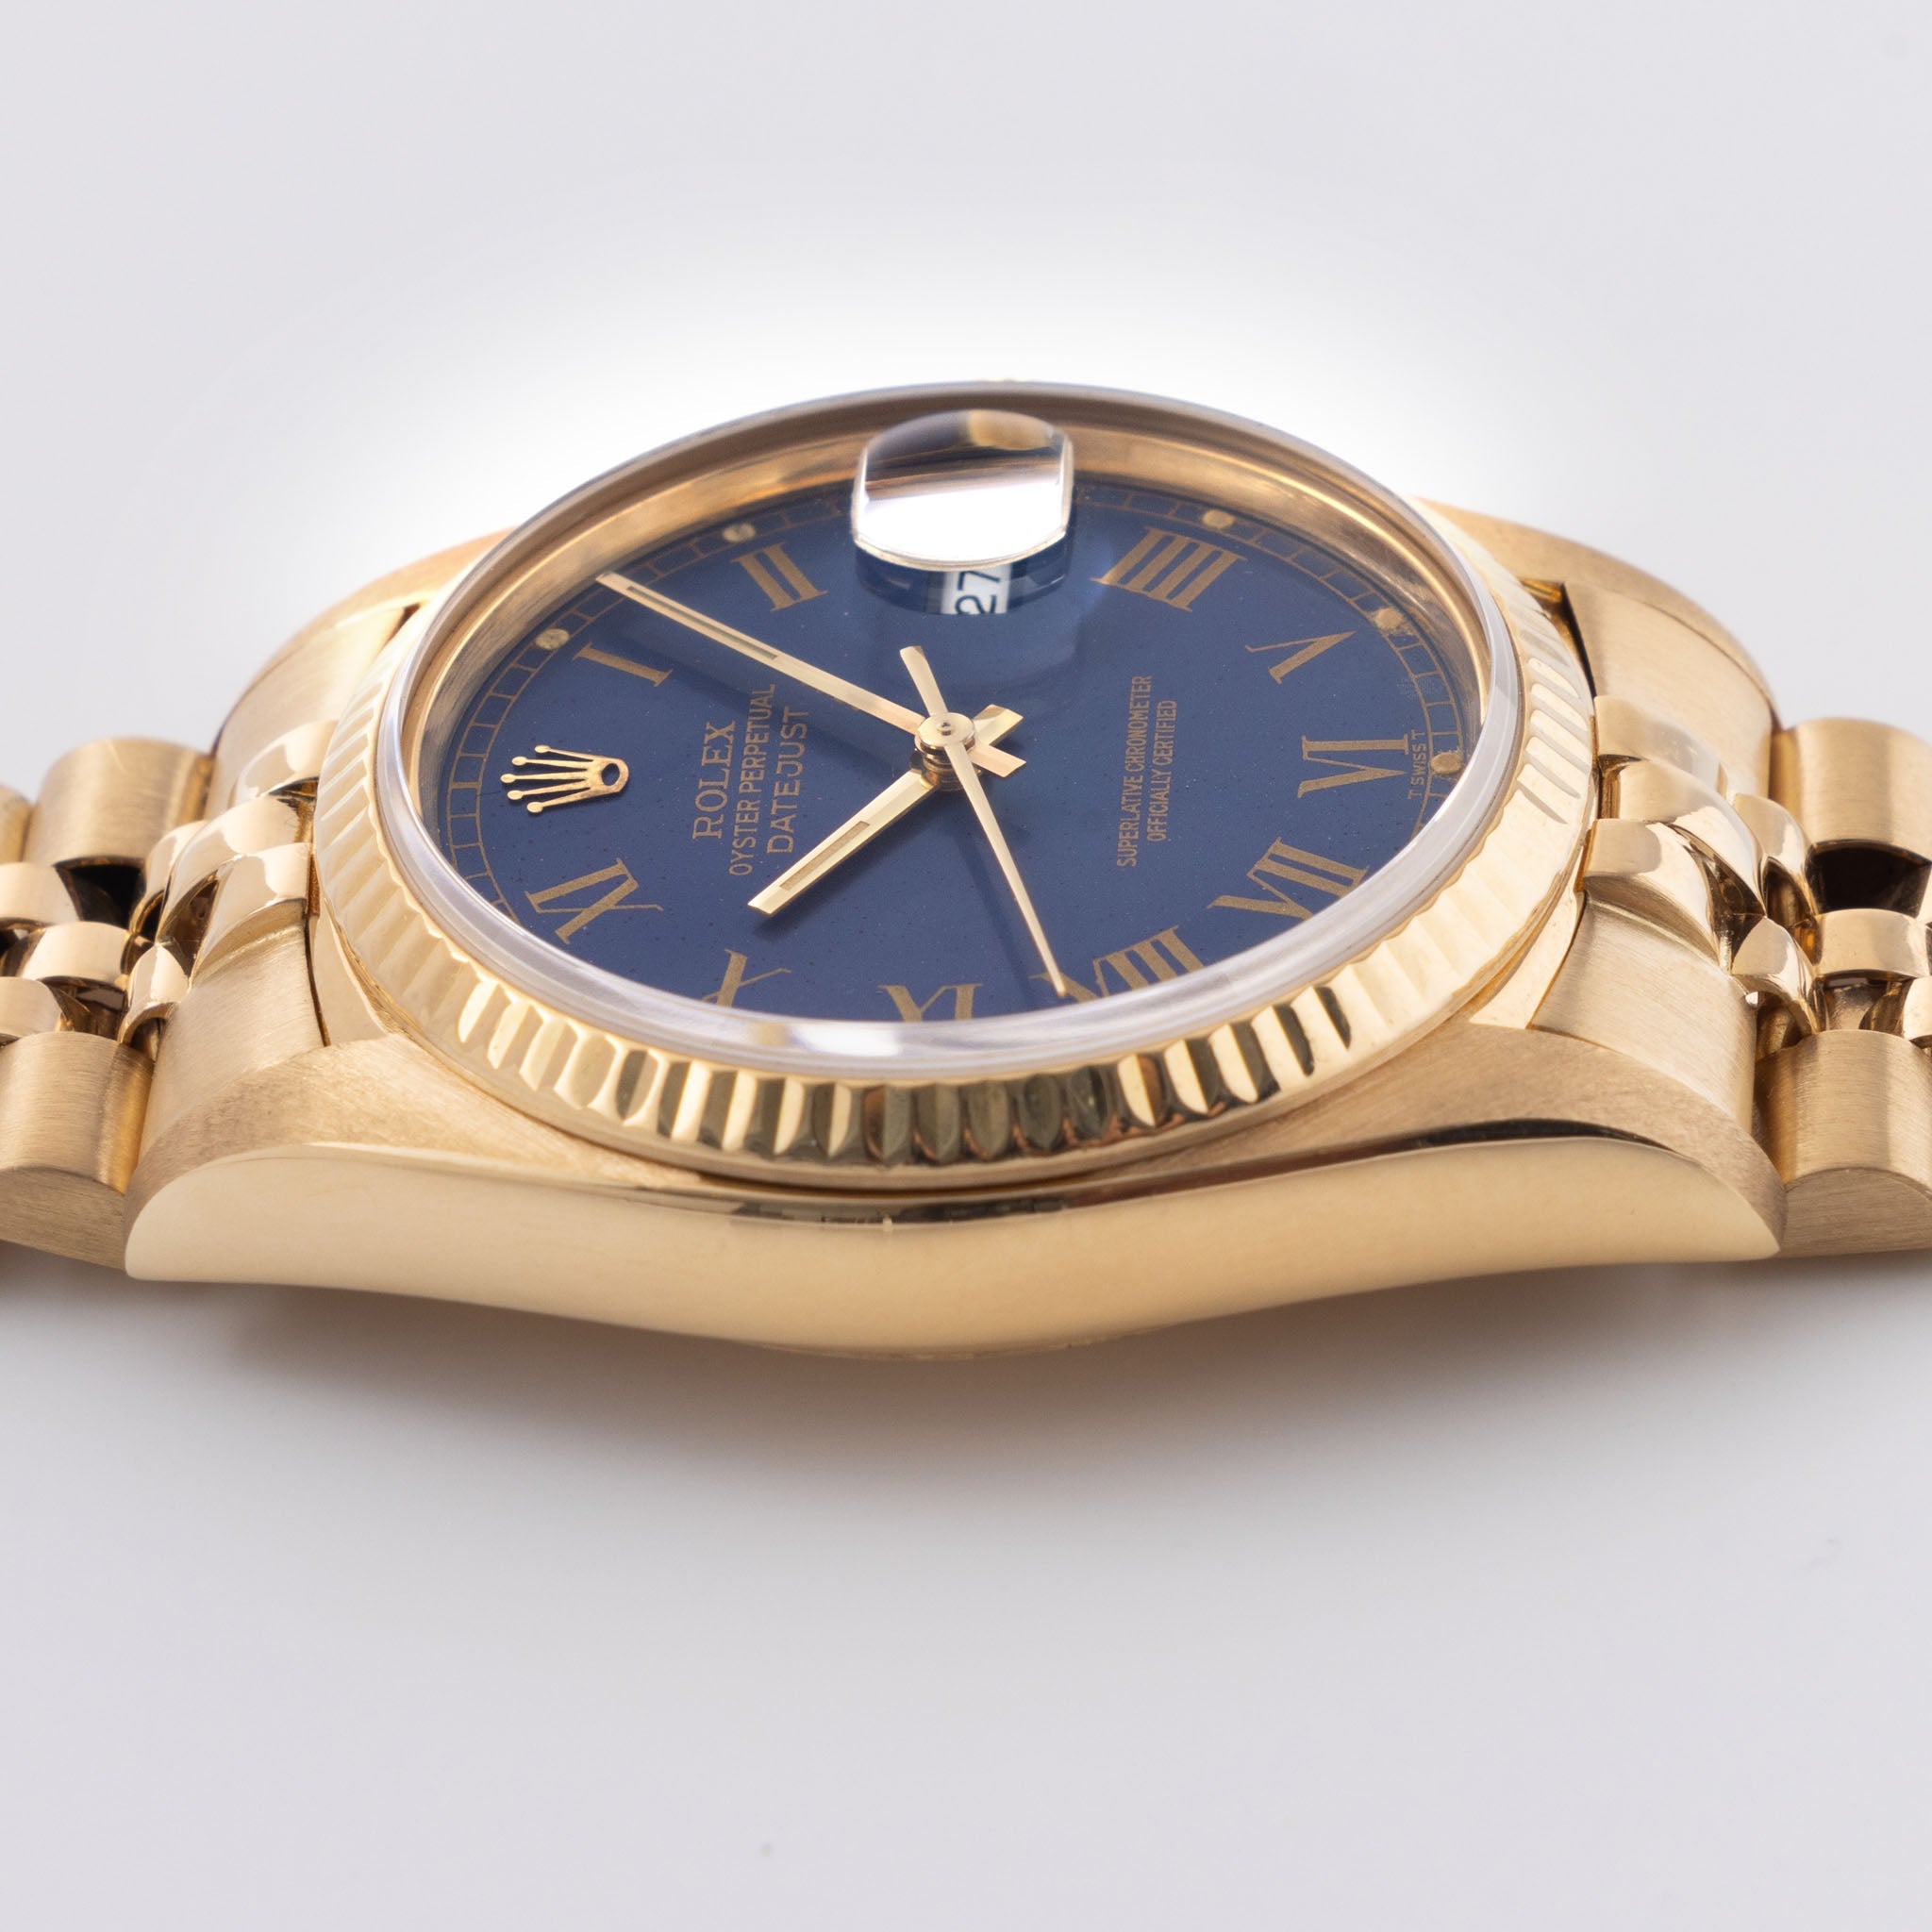 Rolex Datejust Yellow Gold Blue Buckley Dial Ref 16018